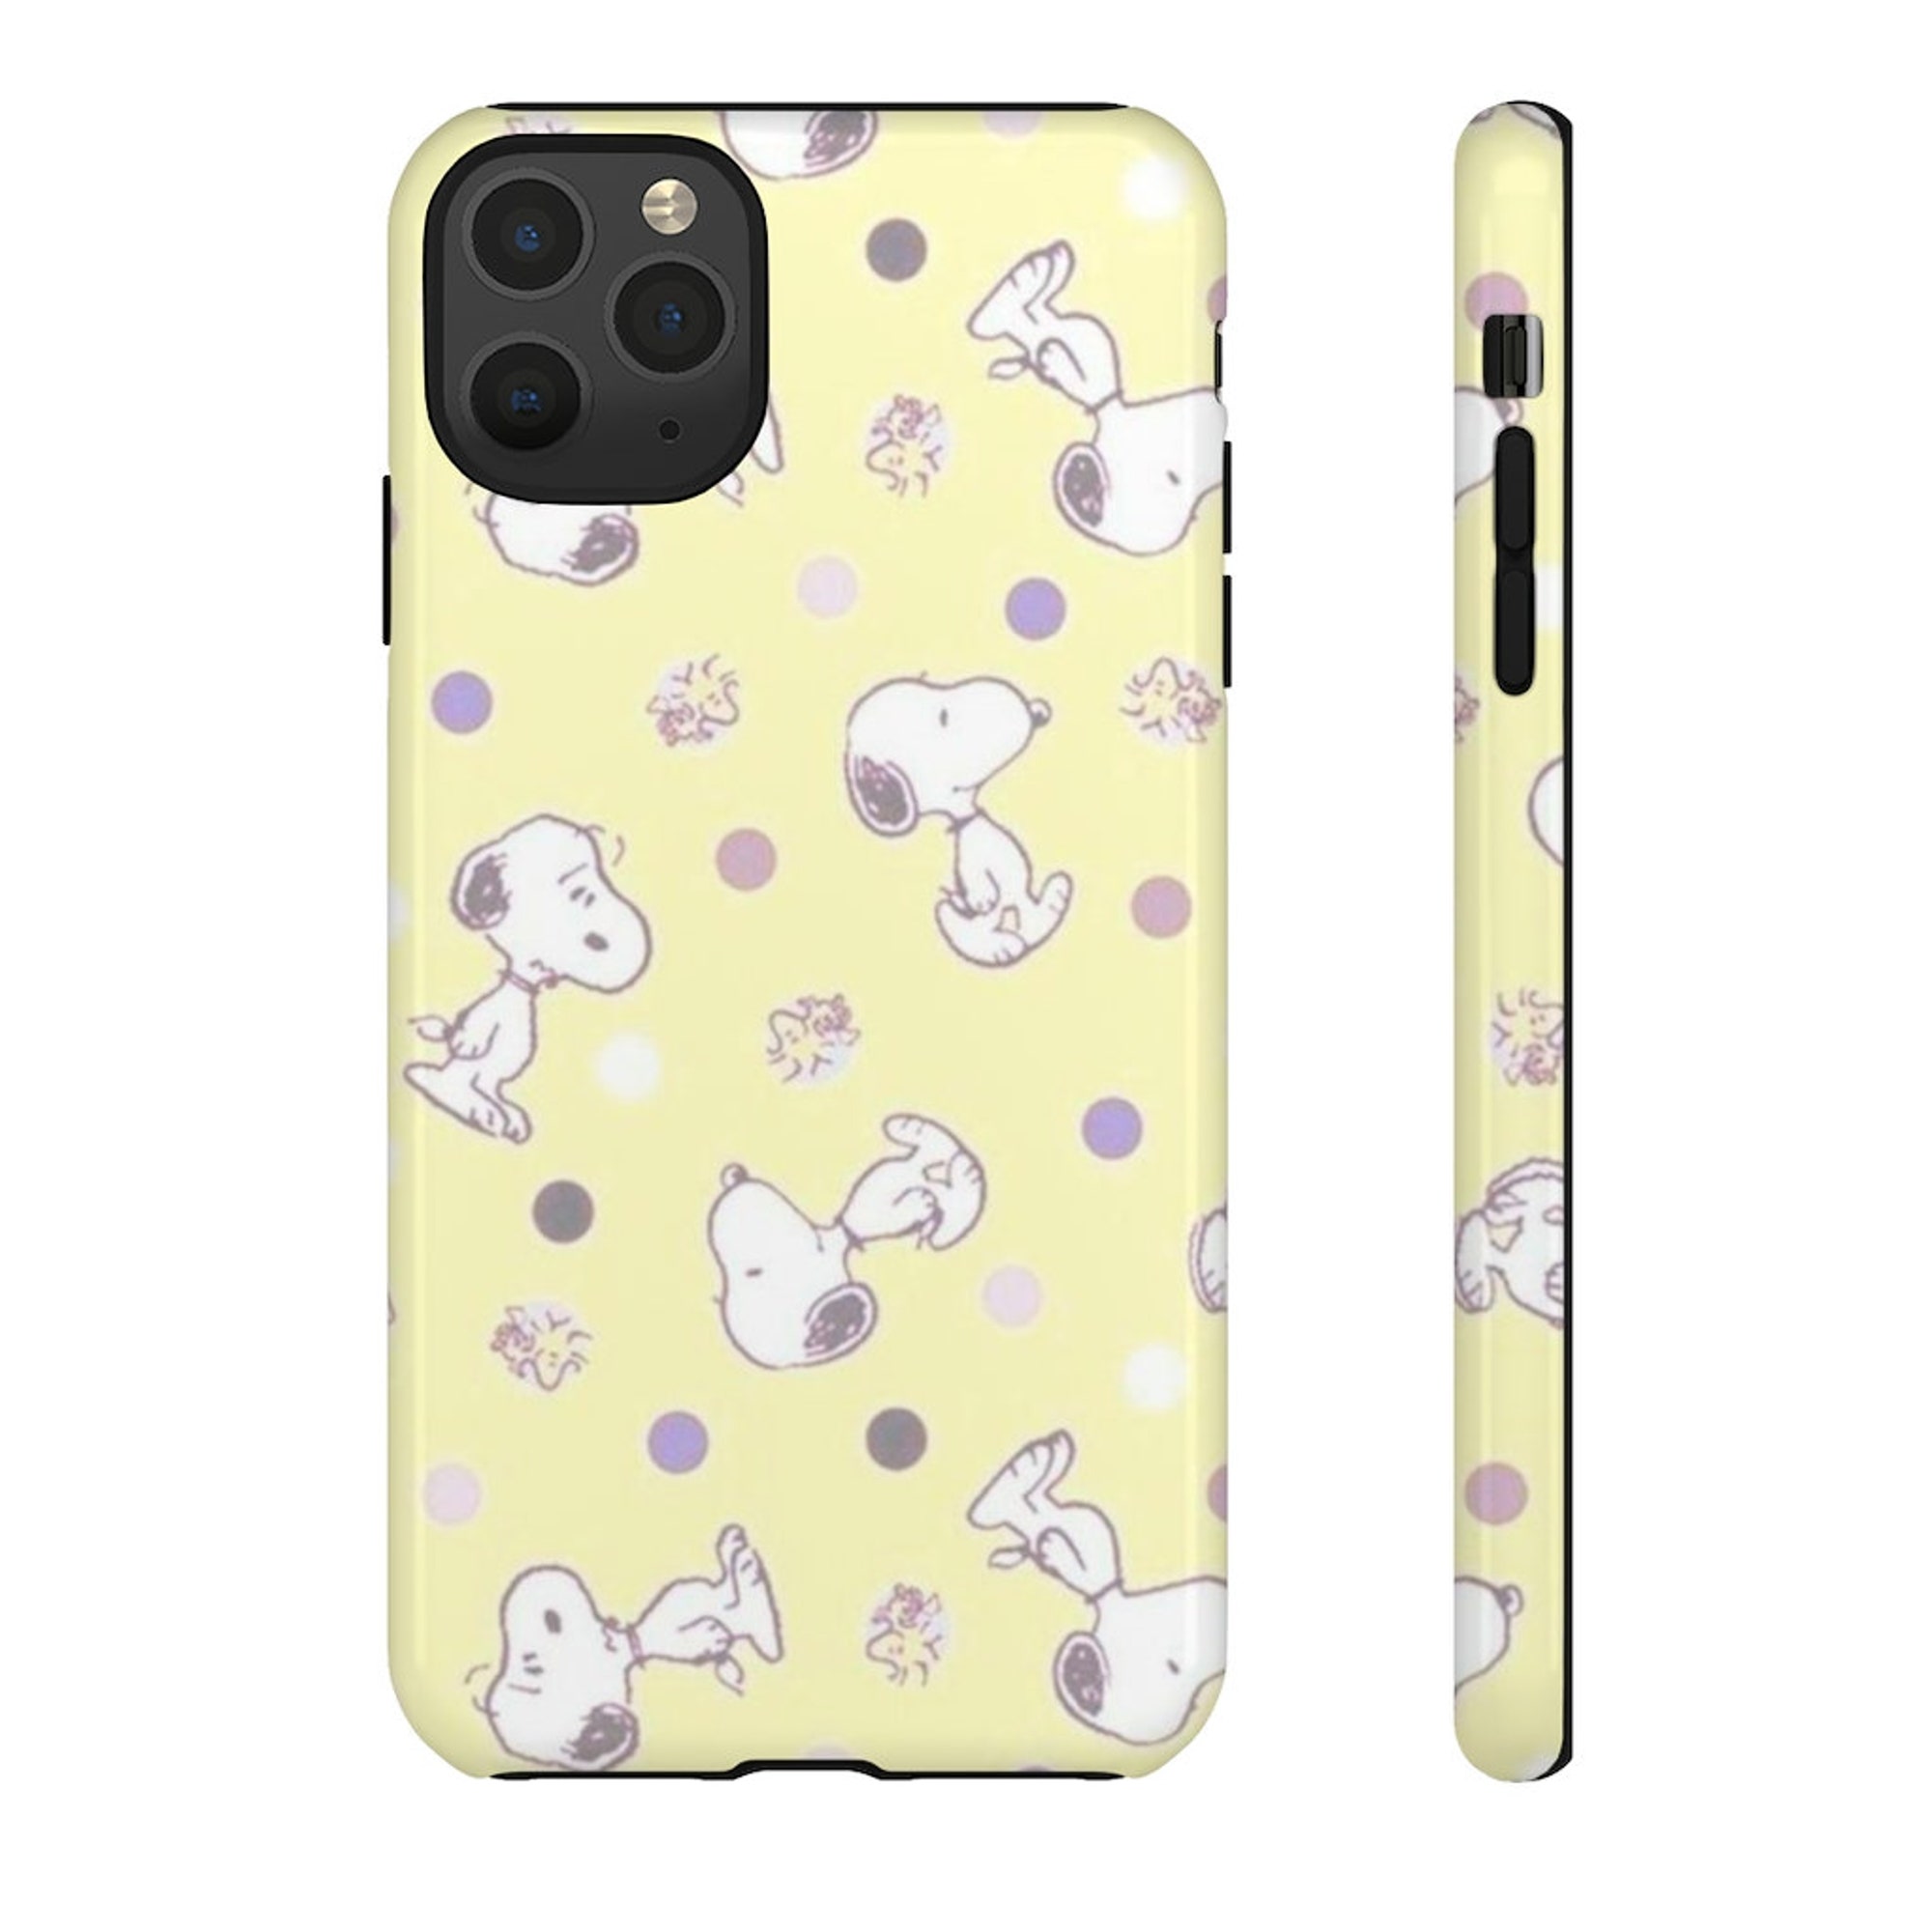 Discover Snoopy iPhone Case